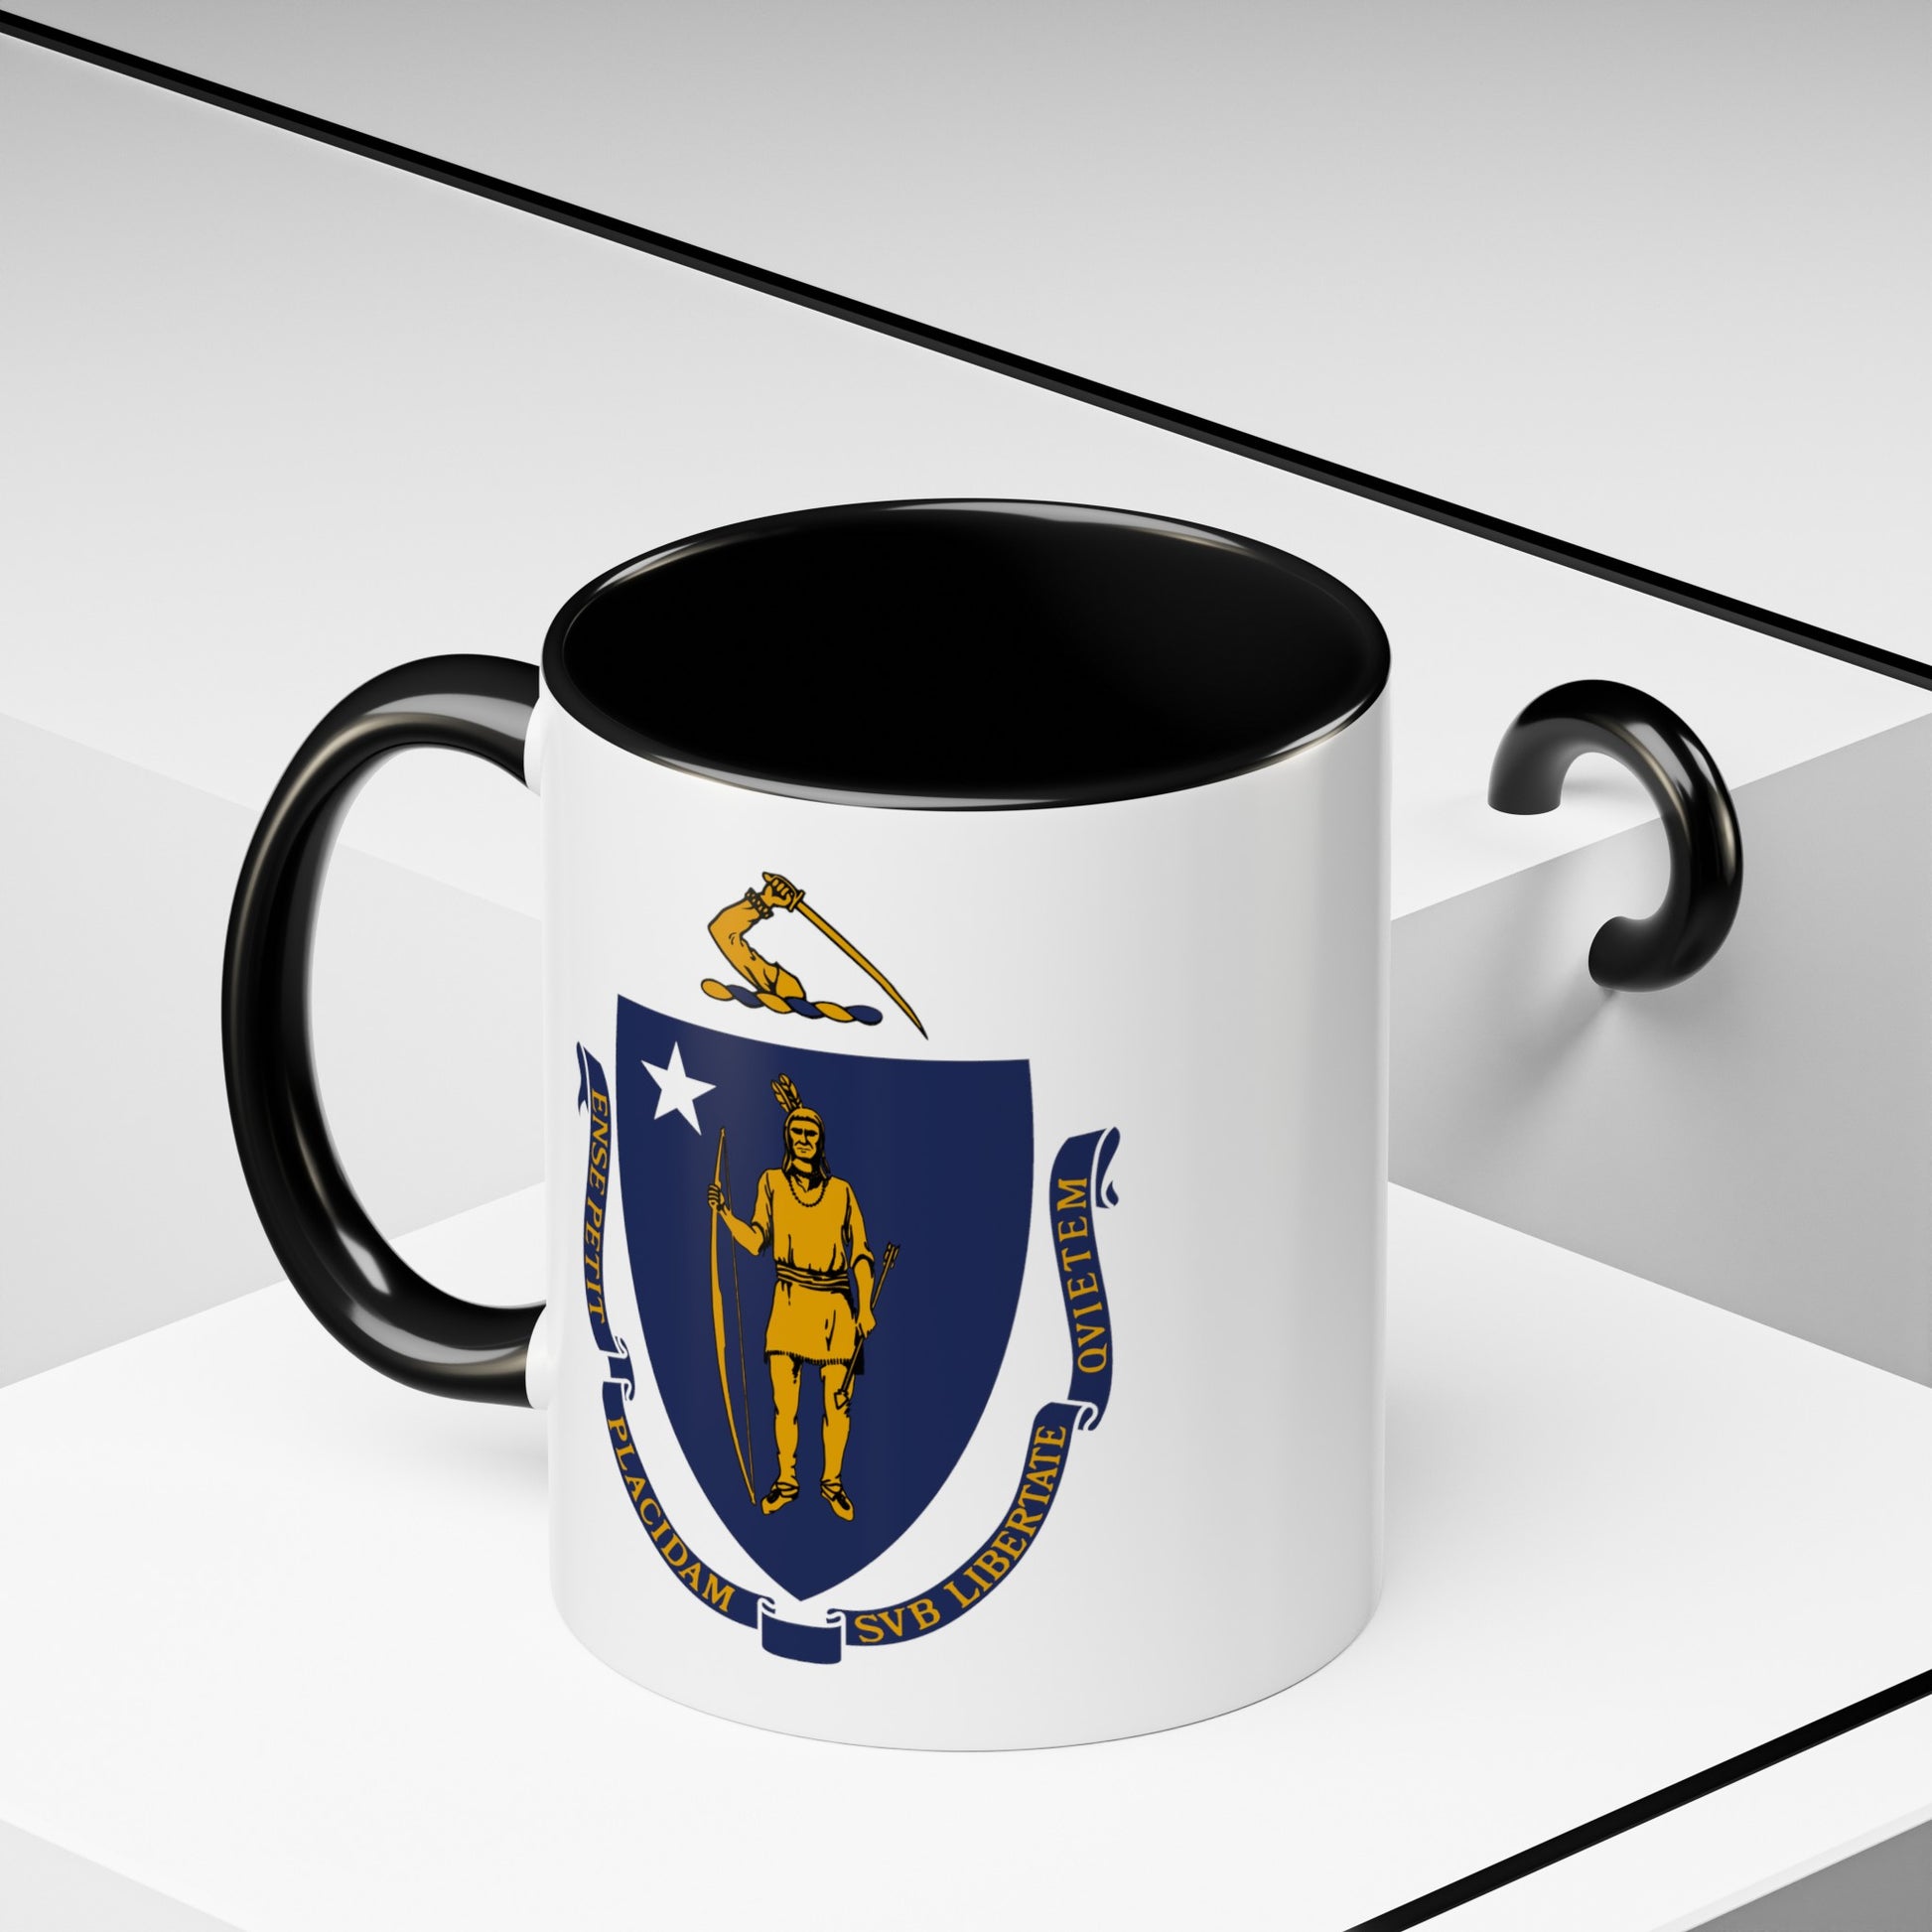 Commonwealth of Massachusetts State Flag - Double Sided Black Accent White Ceramic Coffee Mug 11oz by TheGlassyLass.com